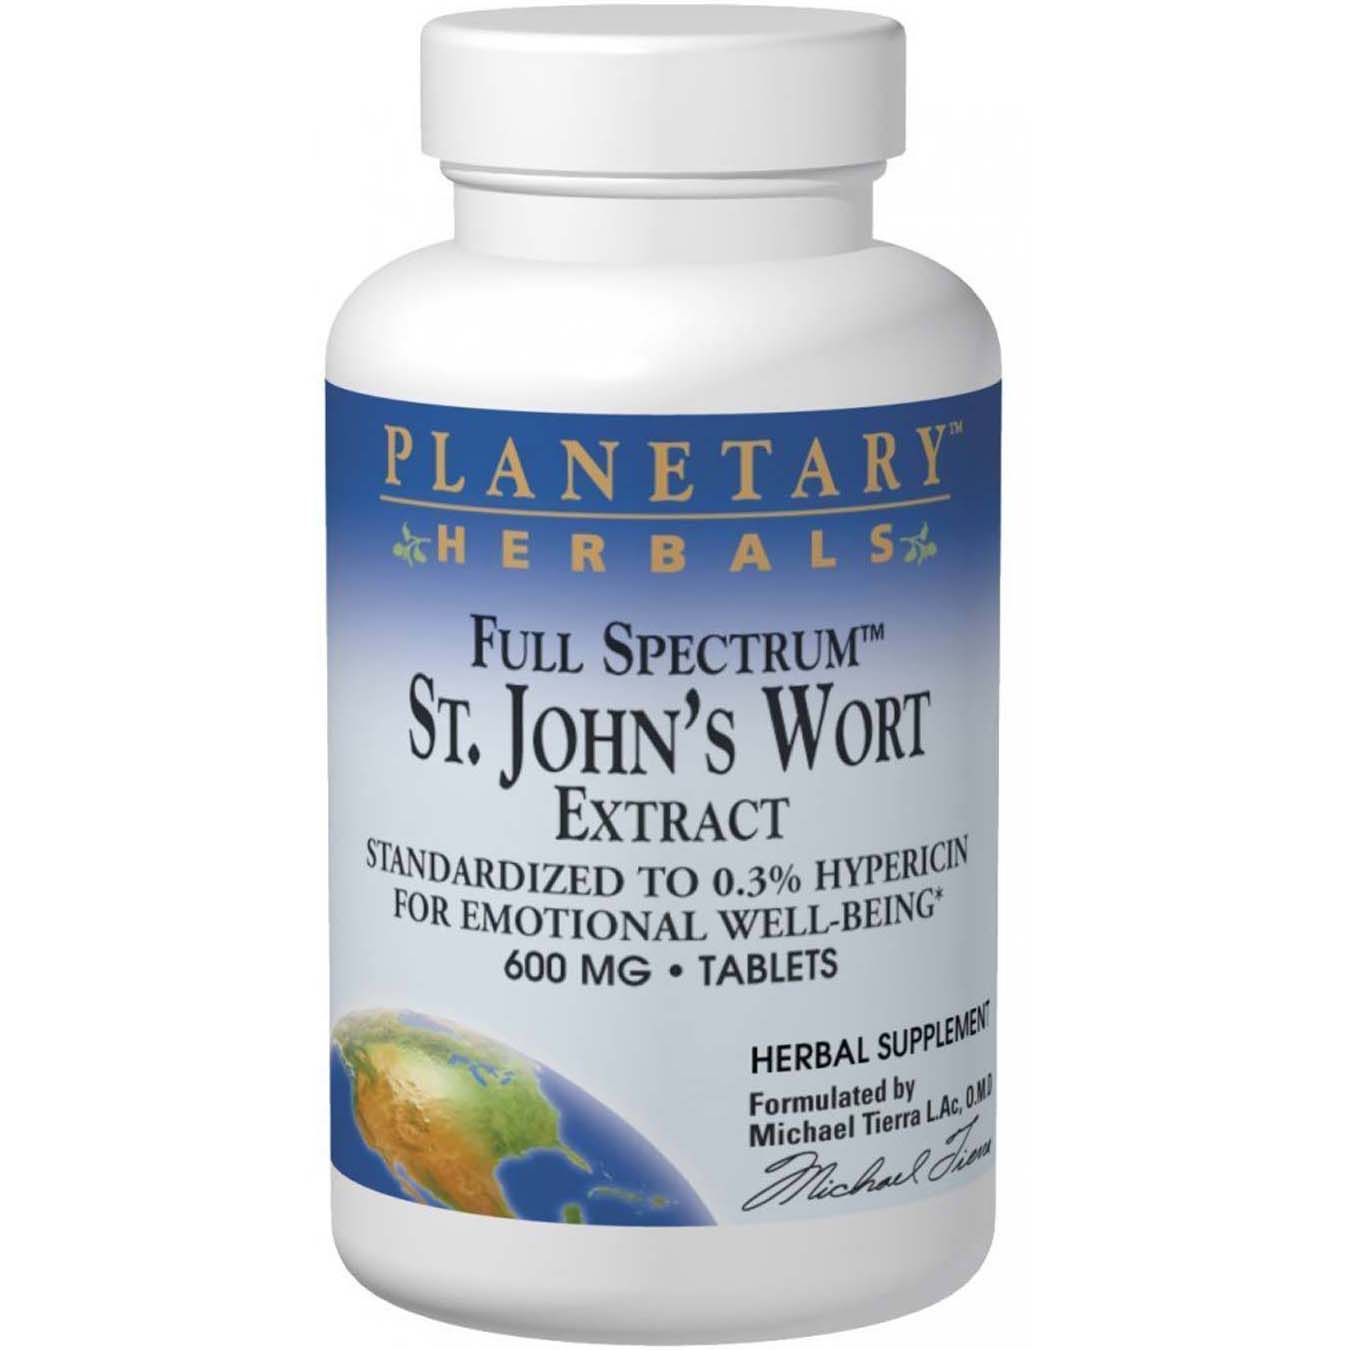 Planetary Herbals St' John's Wort Extract Full Spectrum, 600 mg, 30 Tablets